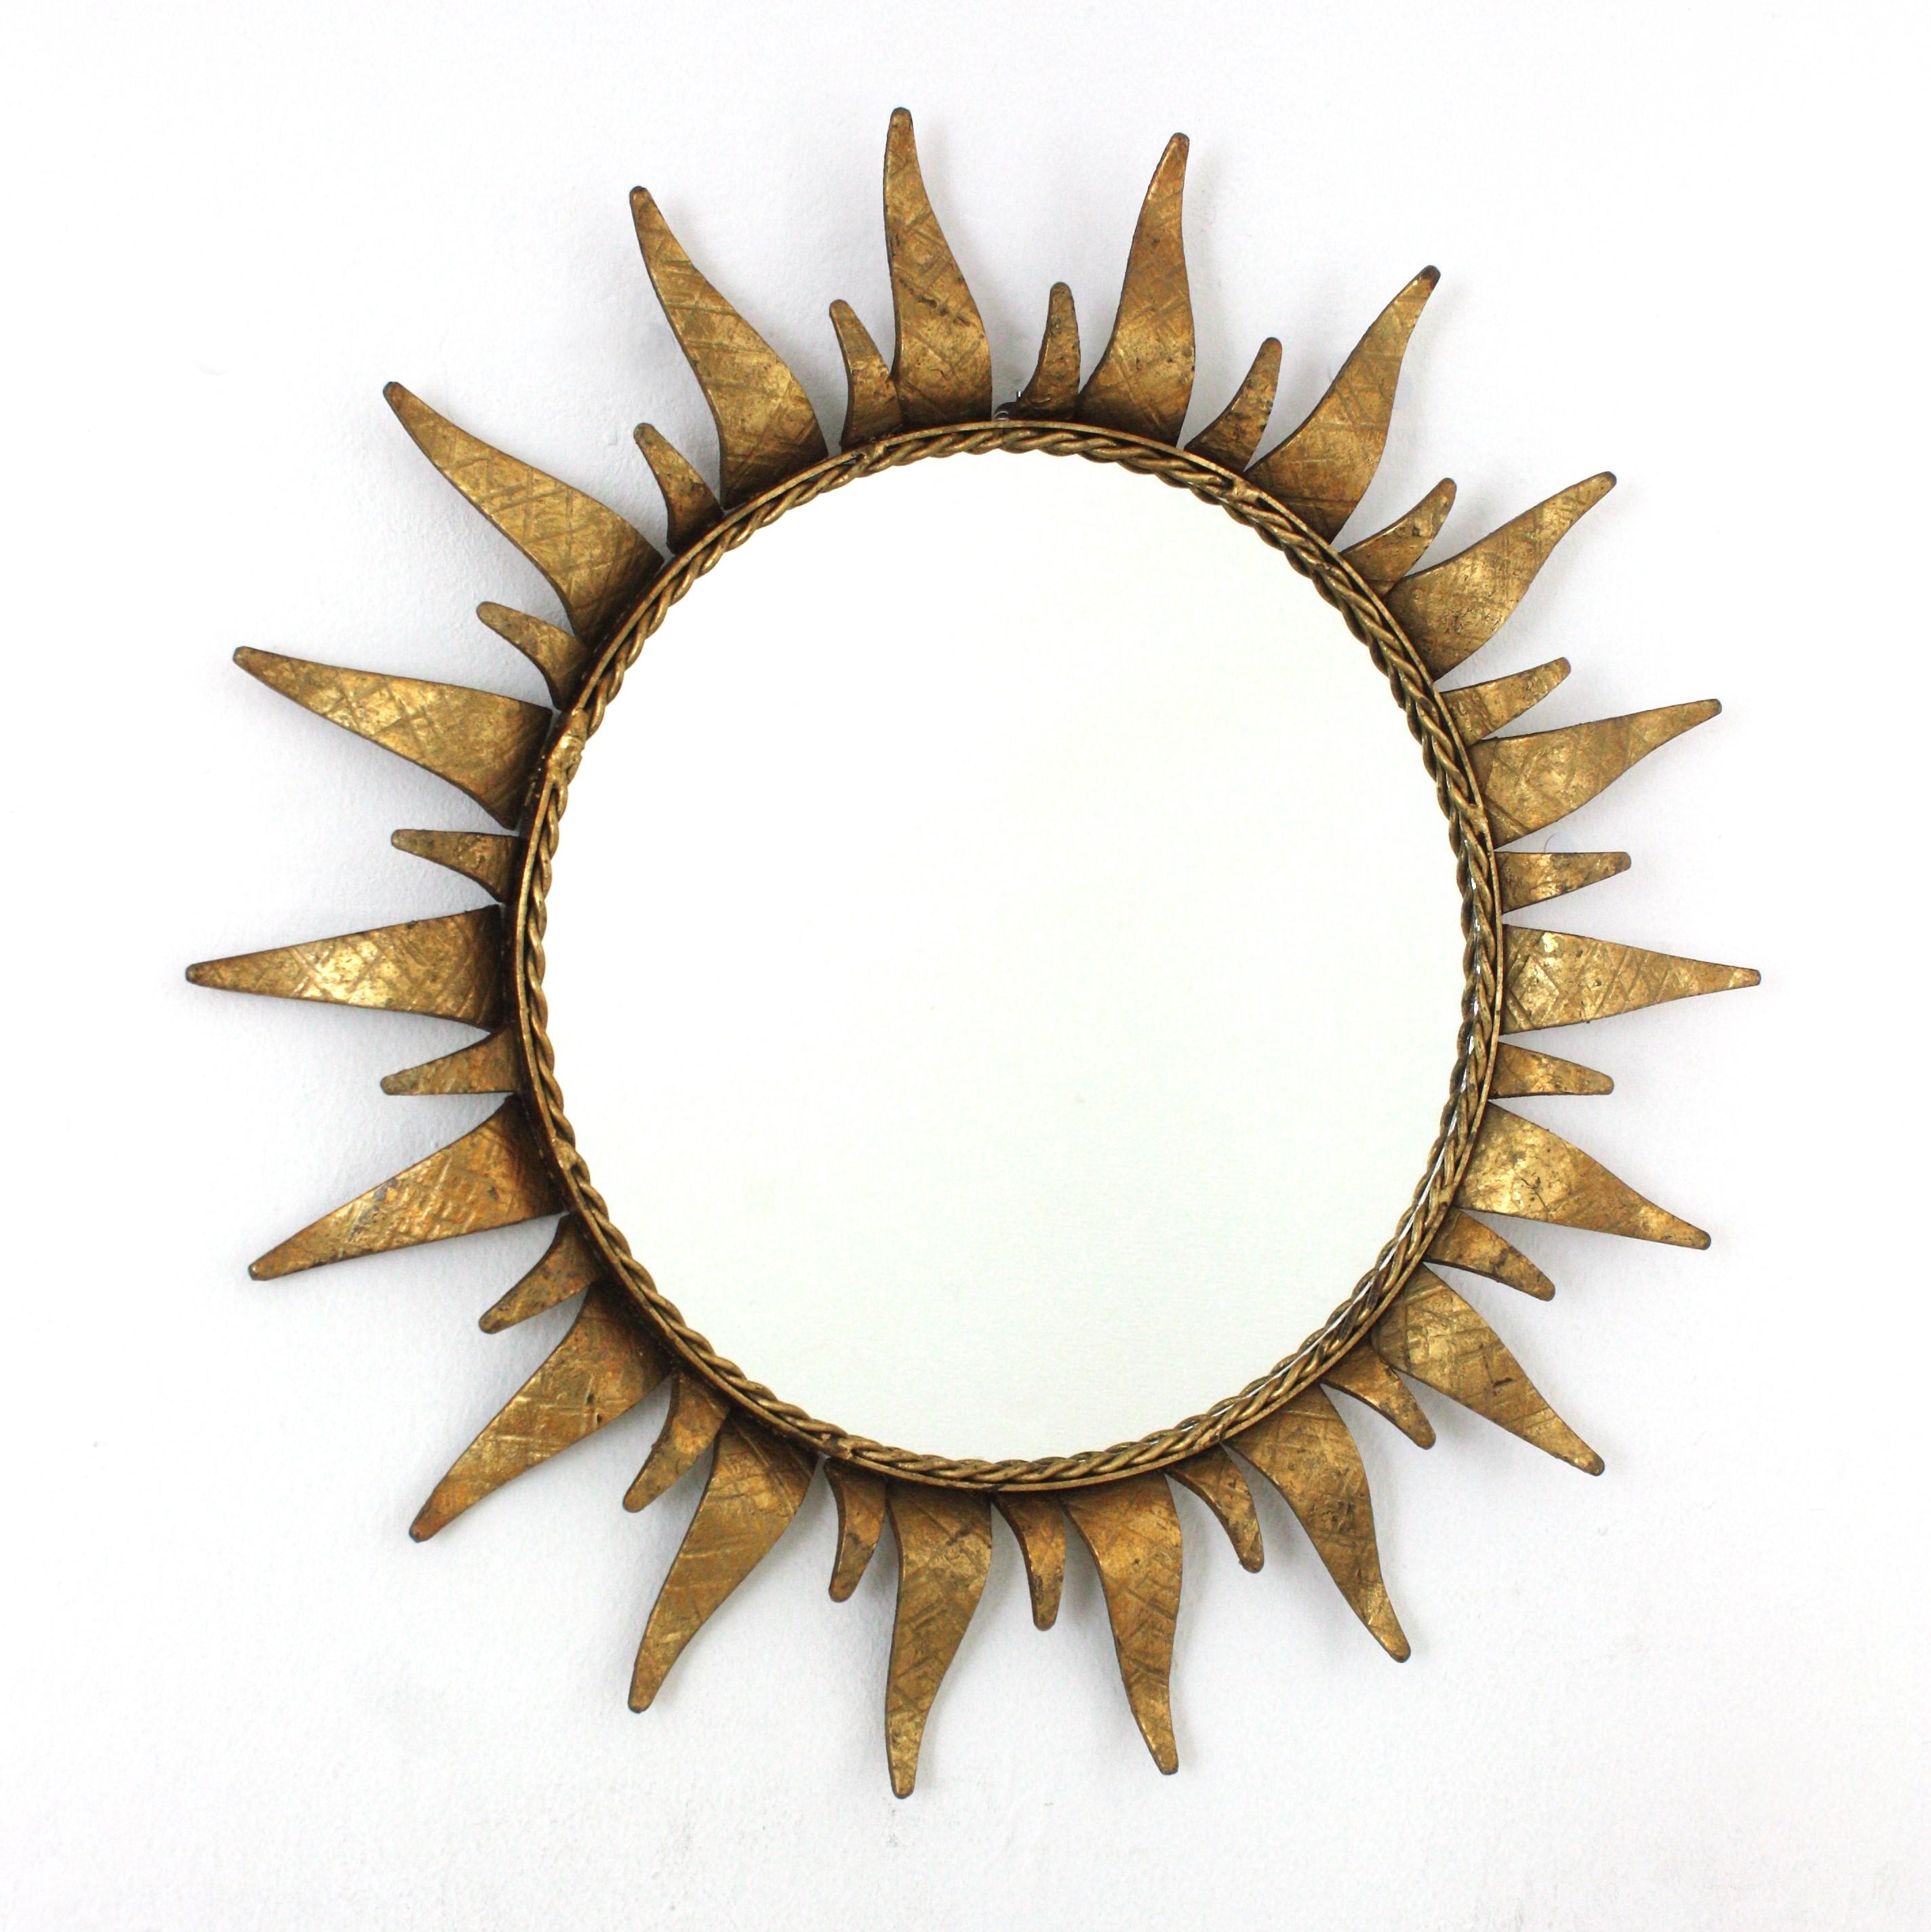 Round Sunburst Mirror in Gold Leaf Gilt Wrought Iron
Mid-Century Modern wrought iron sunburst round wall mirror in gilt iron, Spain, 1950s.
This highly decorative sunburst gilt iron mirror has a nice gilded color and a terrific aged patina showing